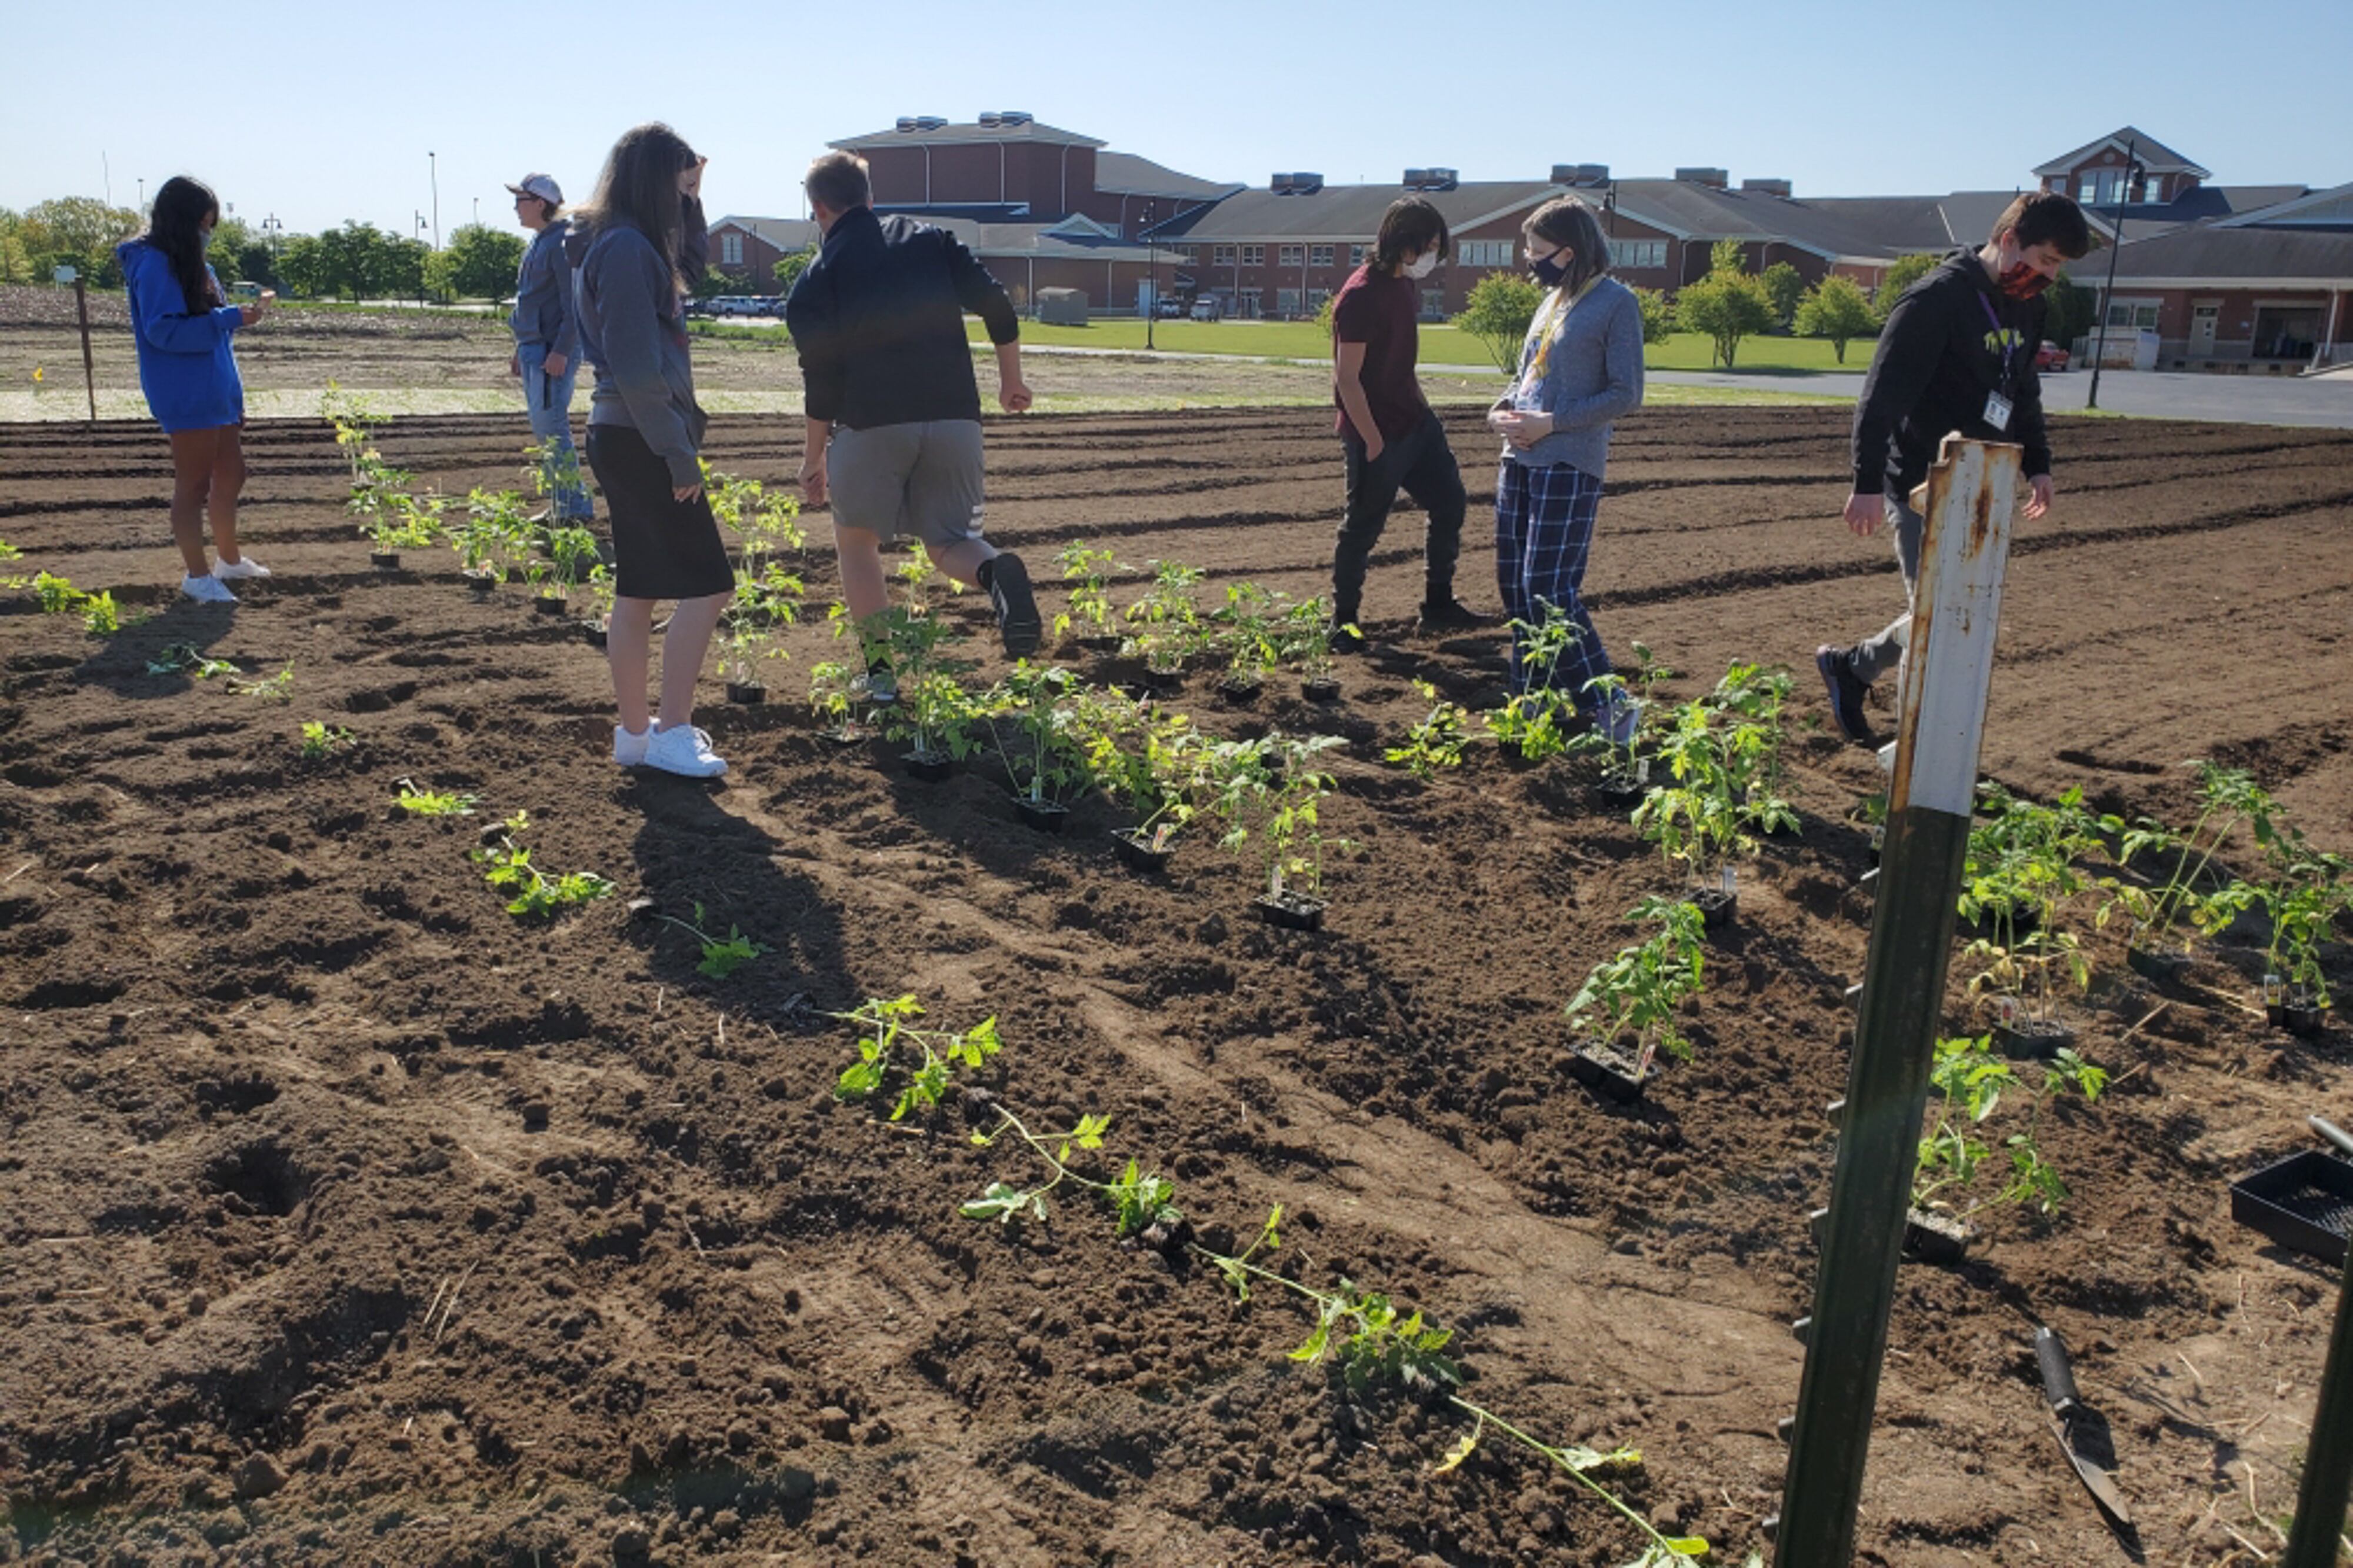 Seven agriculture students work together on a plot of tomatoes on a bright day.